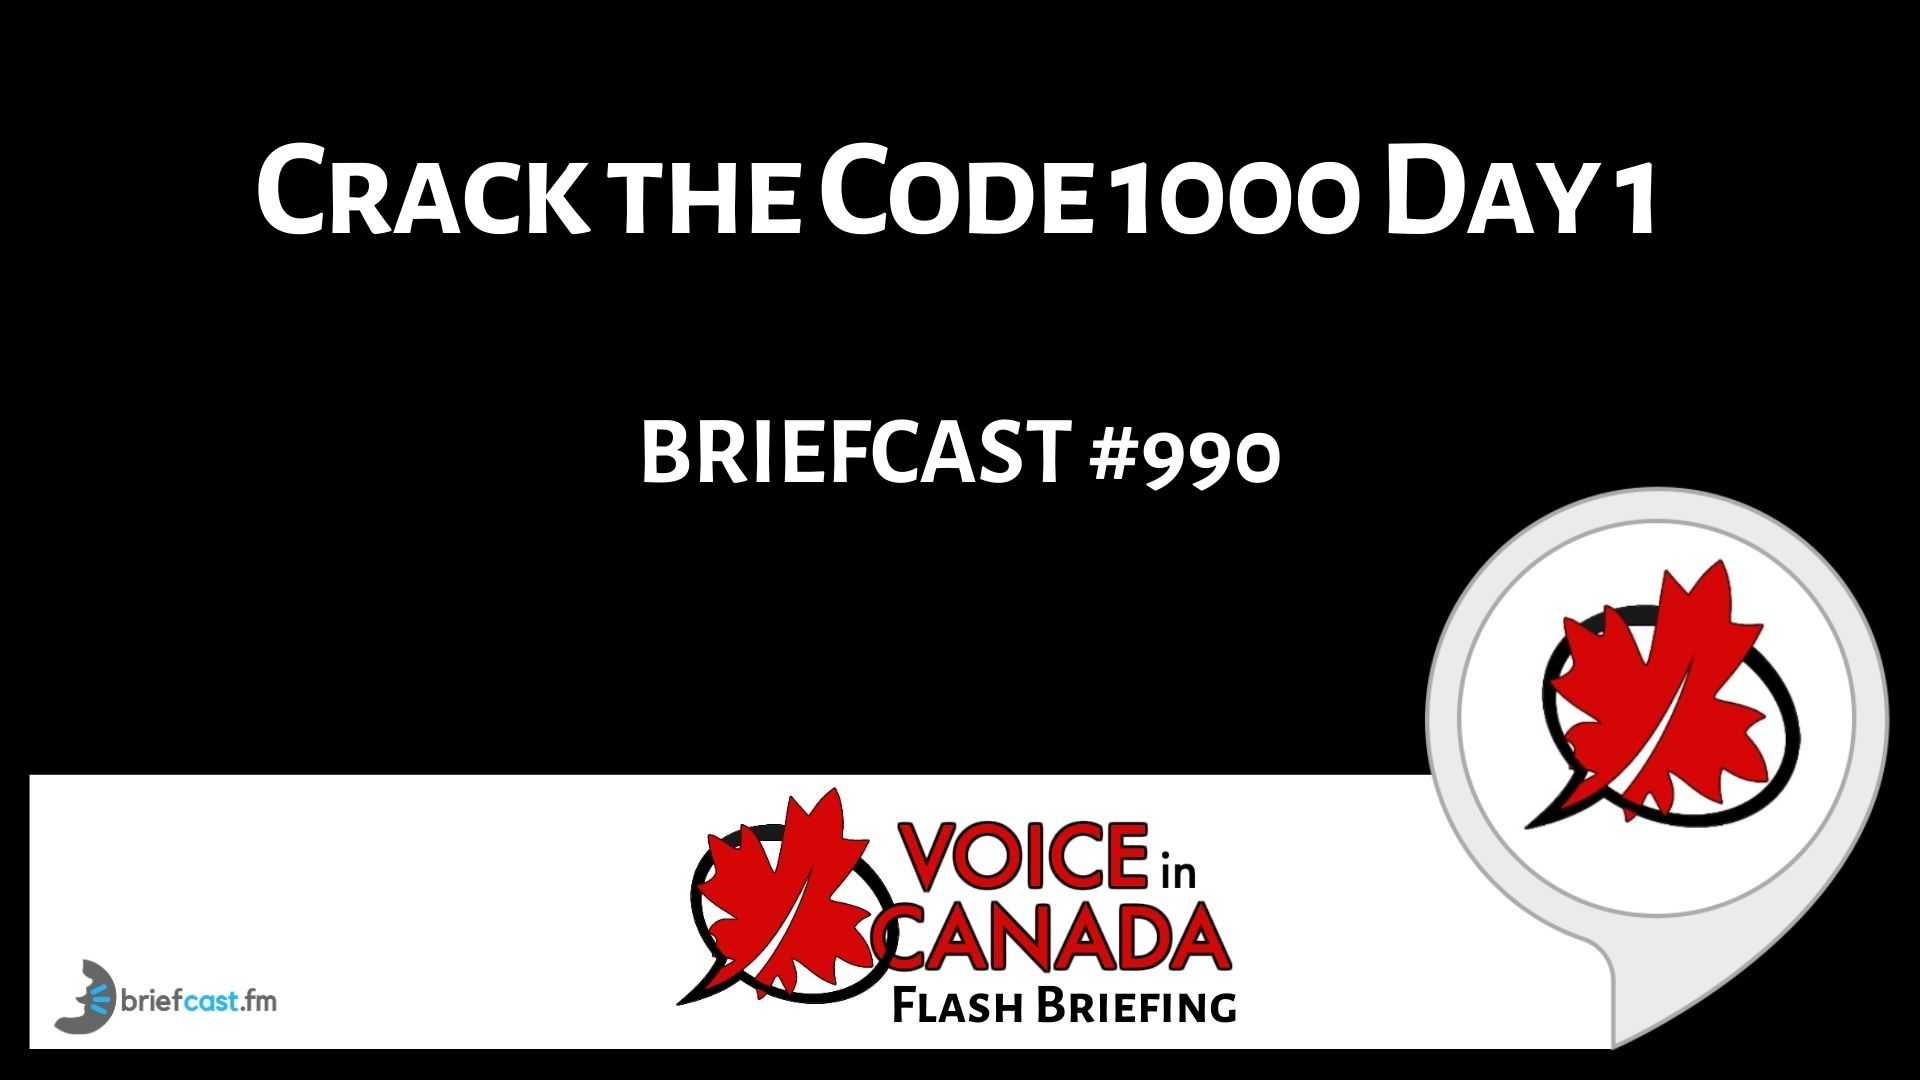 Crack the Code 1000 Day 1